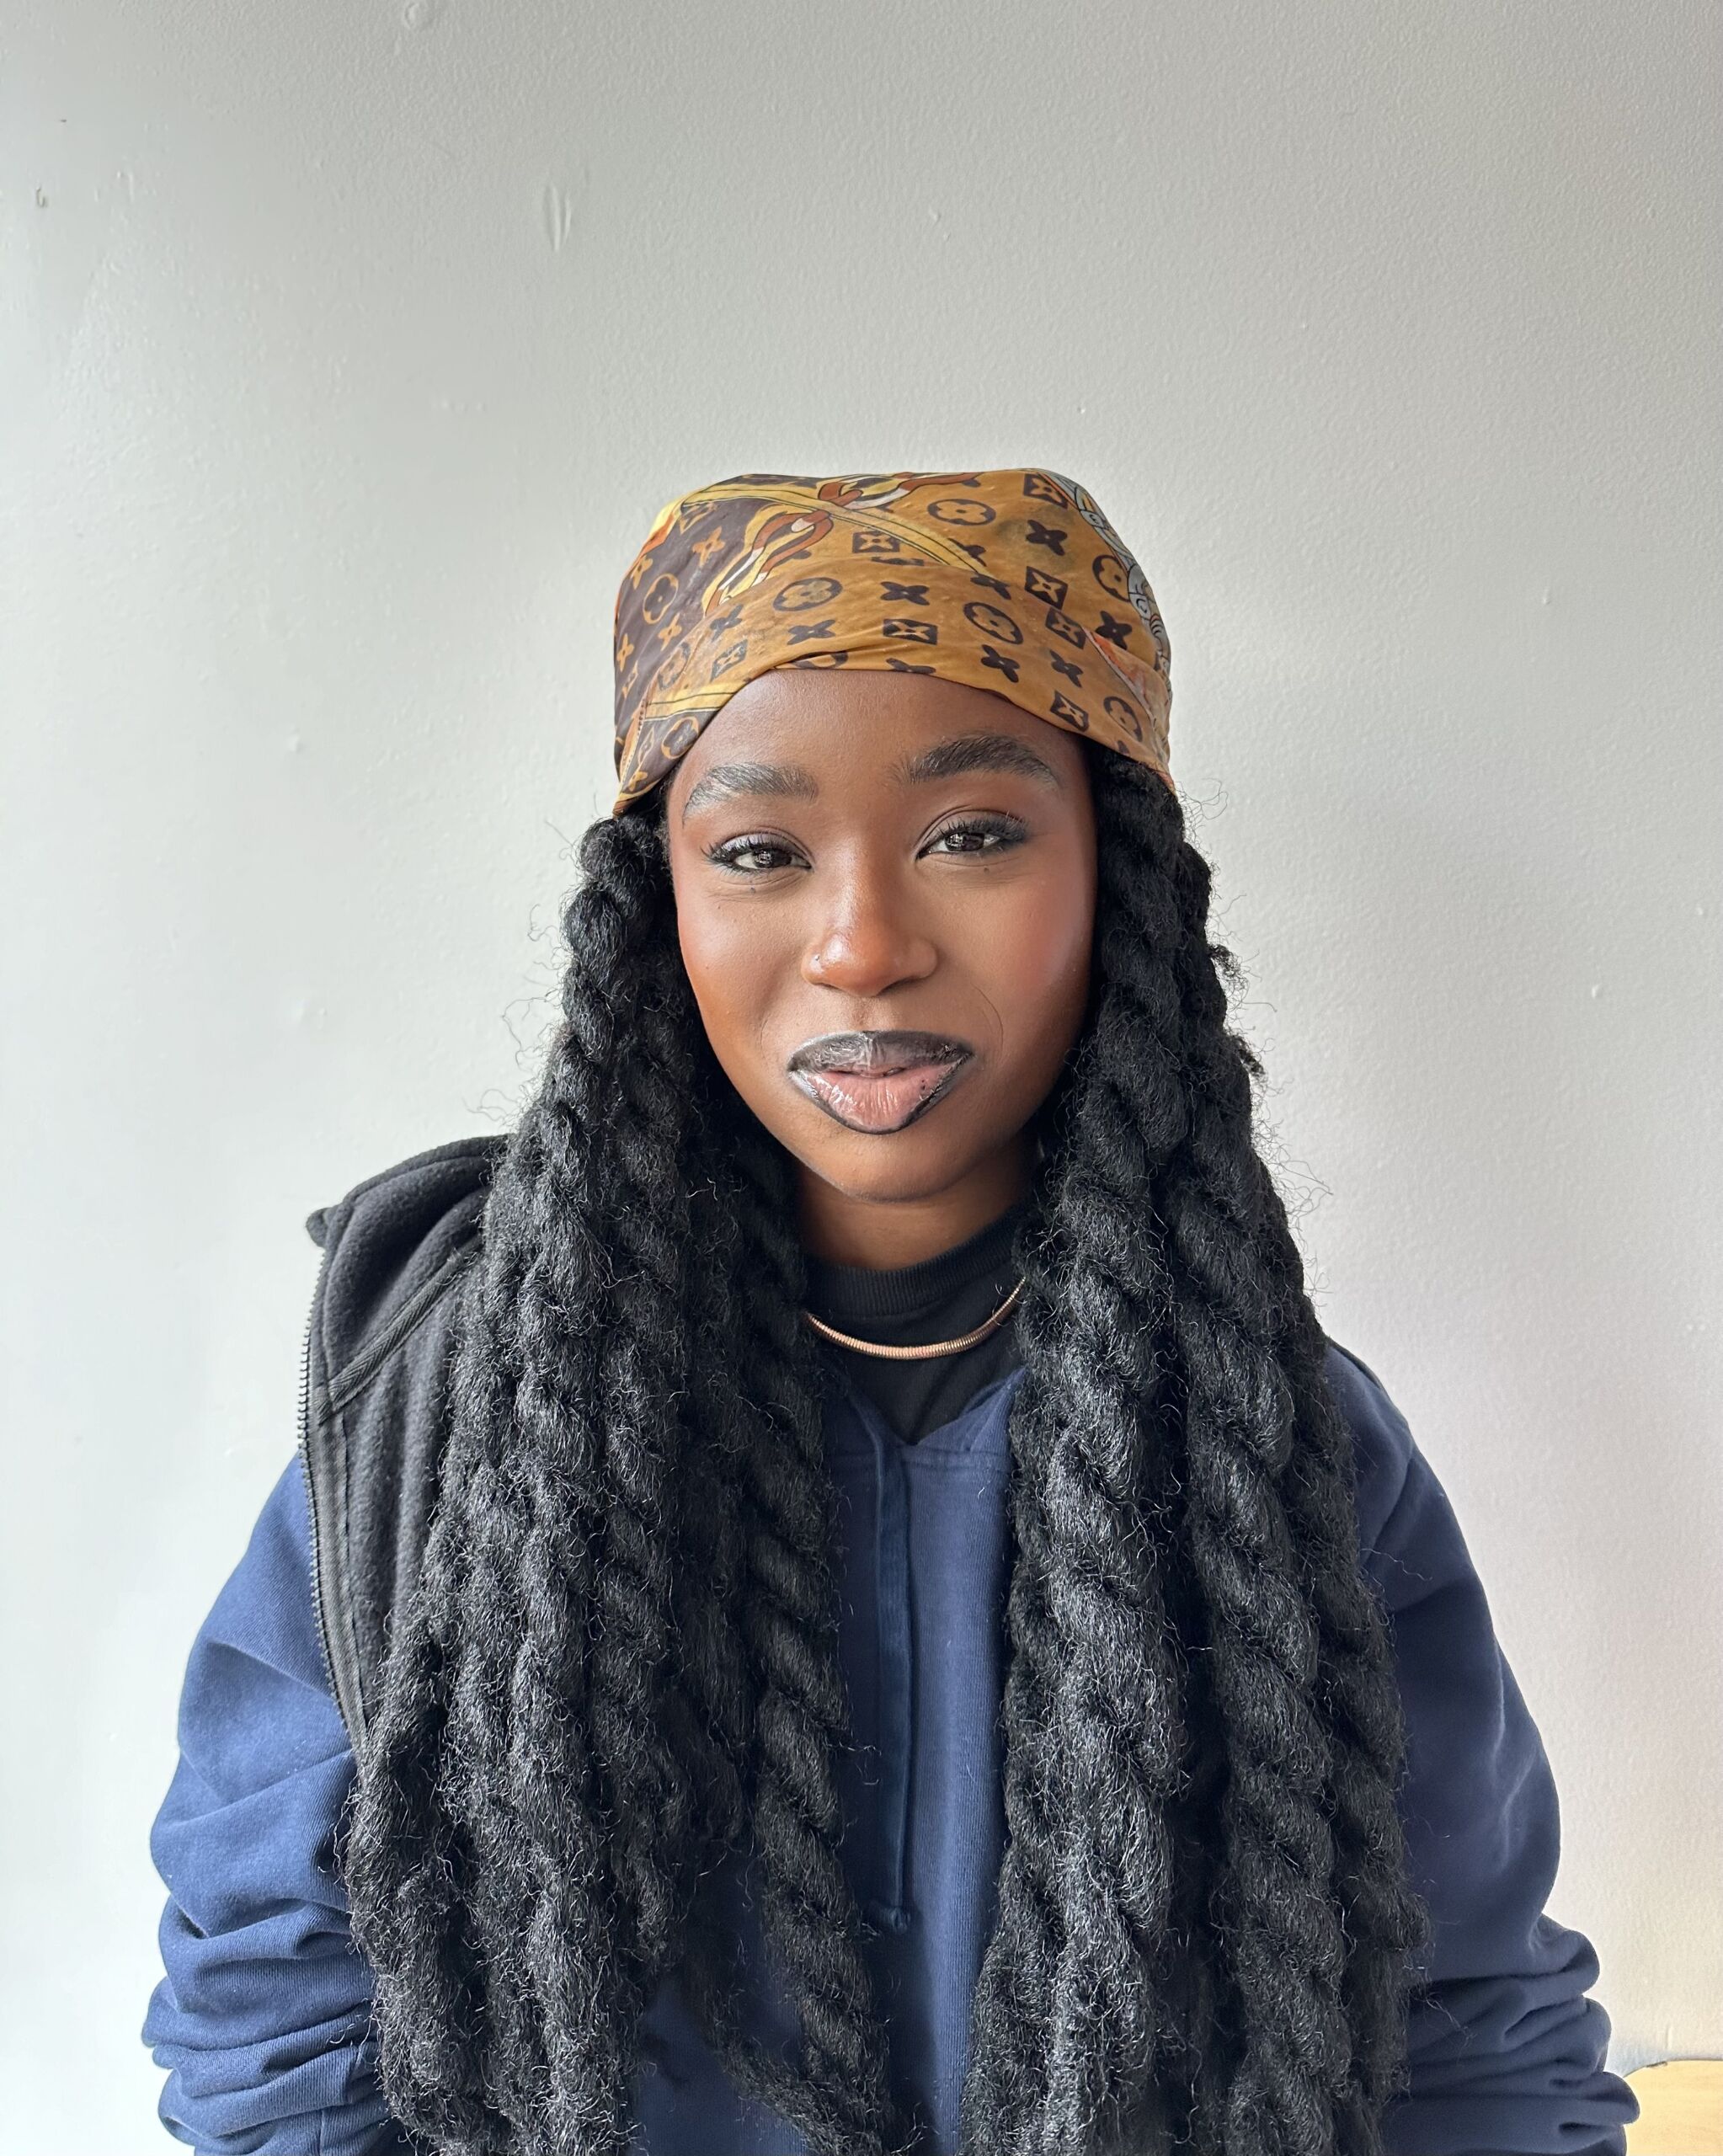 This photo is a headshot of Asiatu Mustapha, a student at The Noble Academy. She is a young Black woman with long hair in big braids. In this photo, she is smiling and wearing a patterned head scarf and a dark blue hoodie.